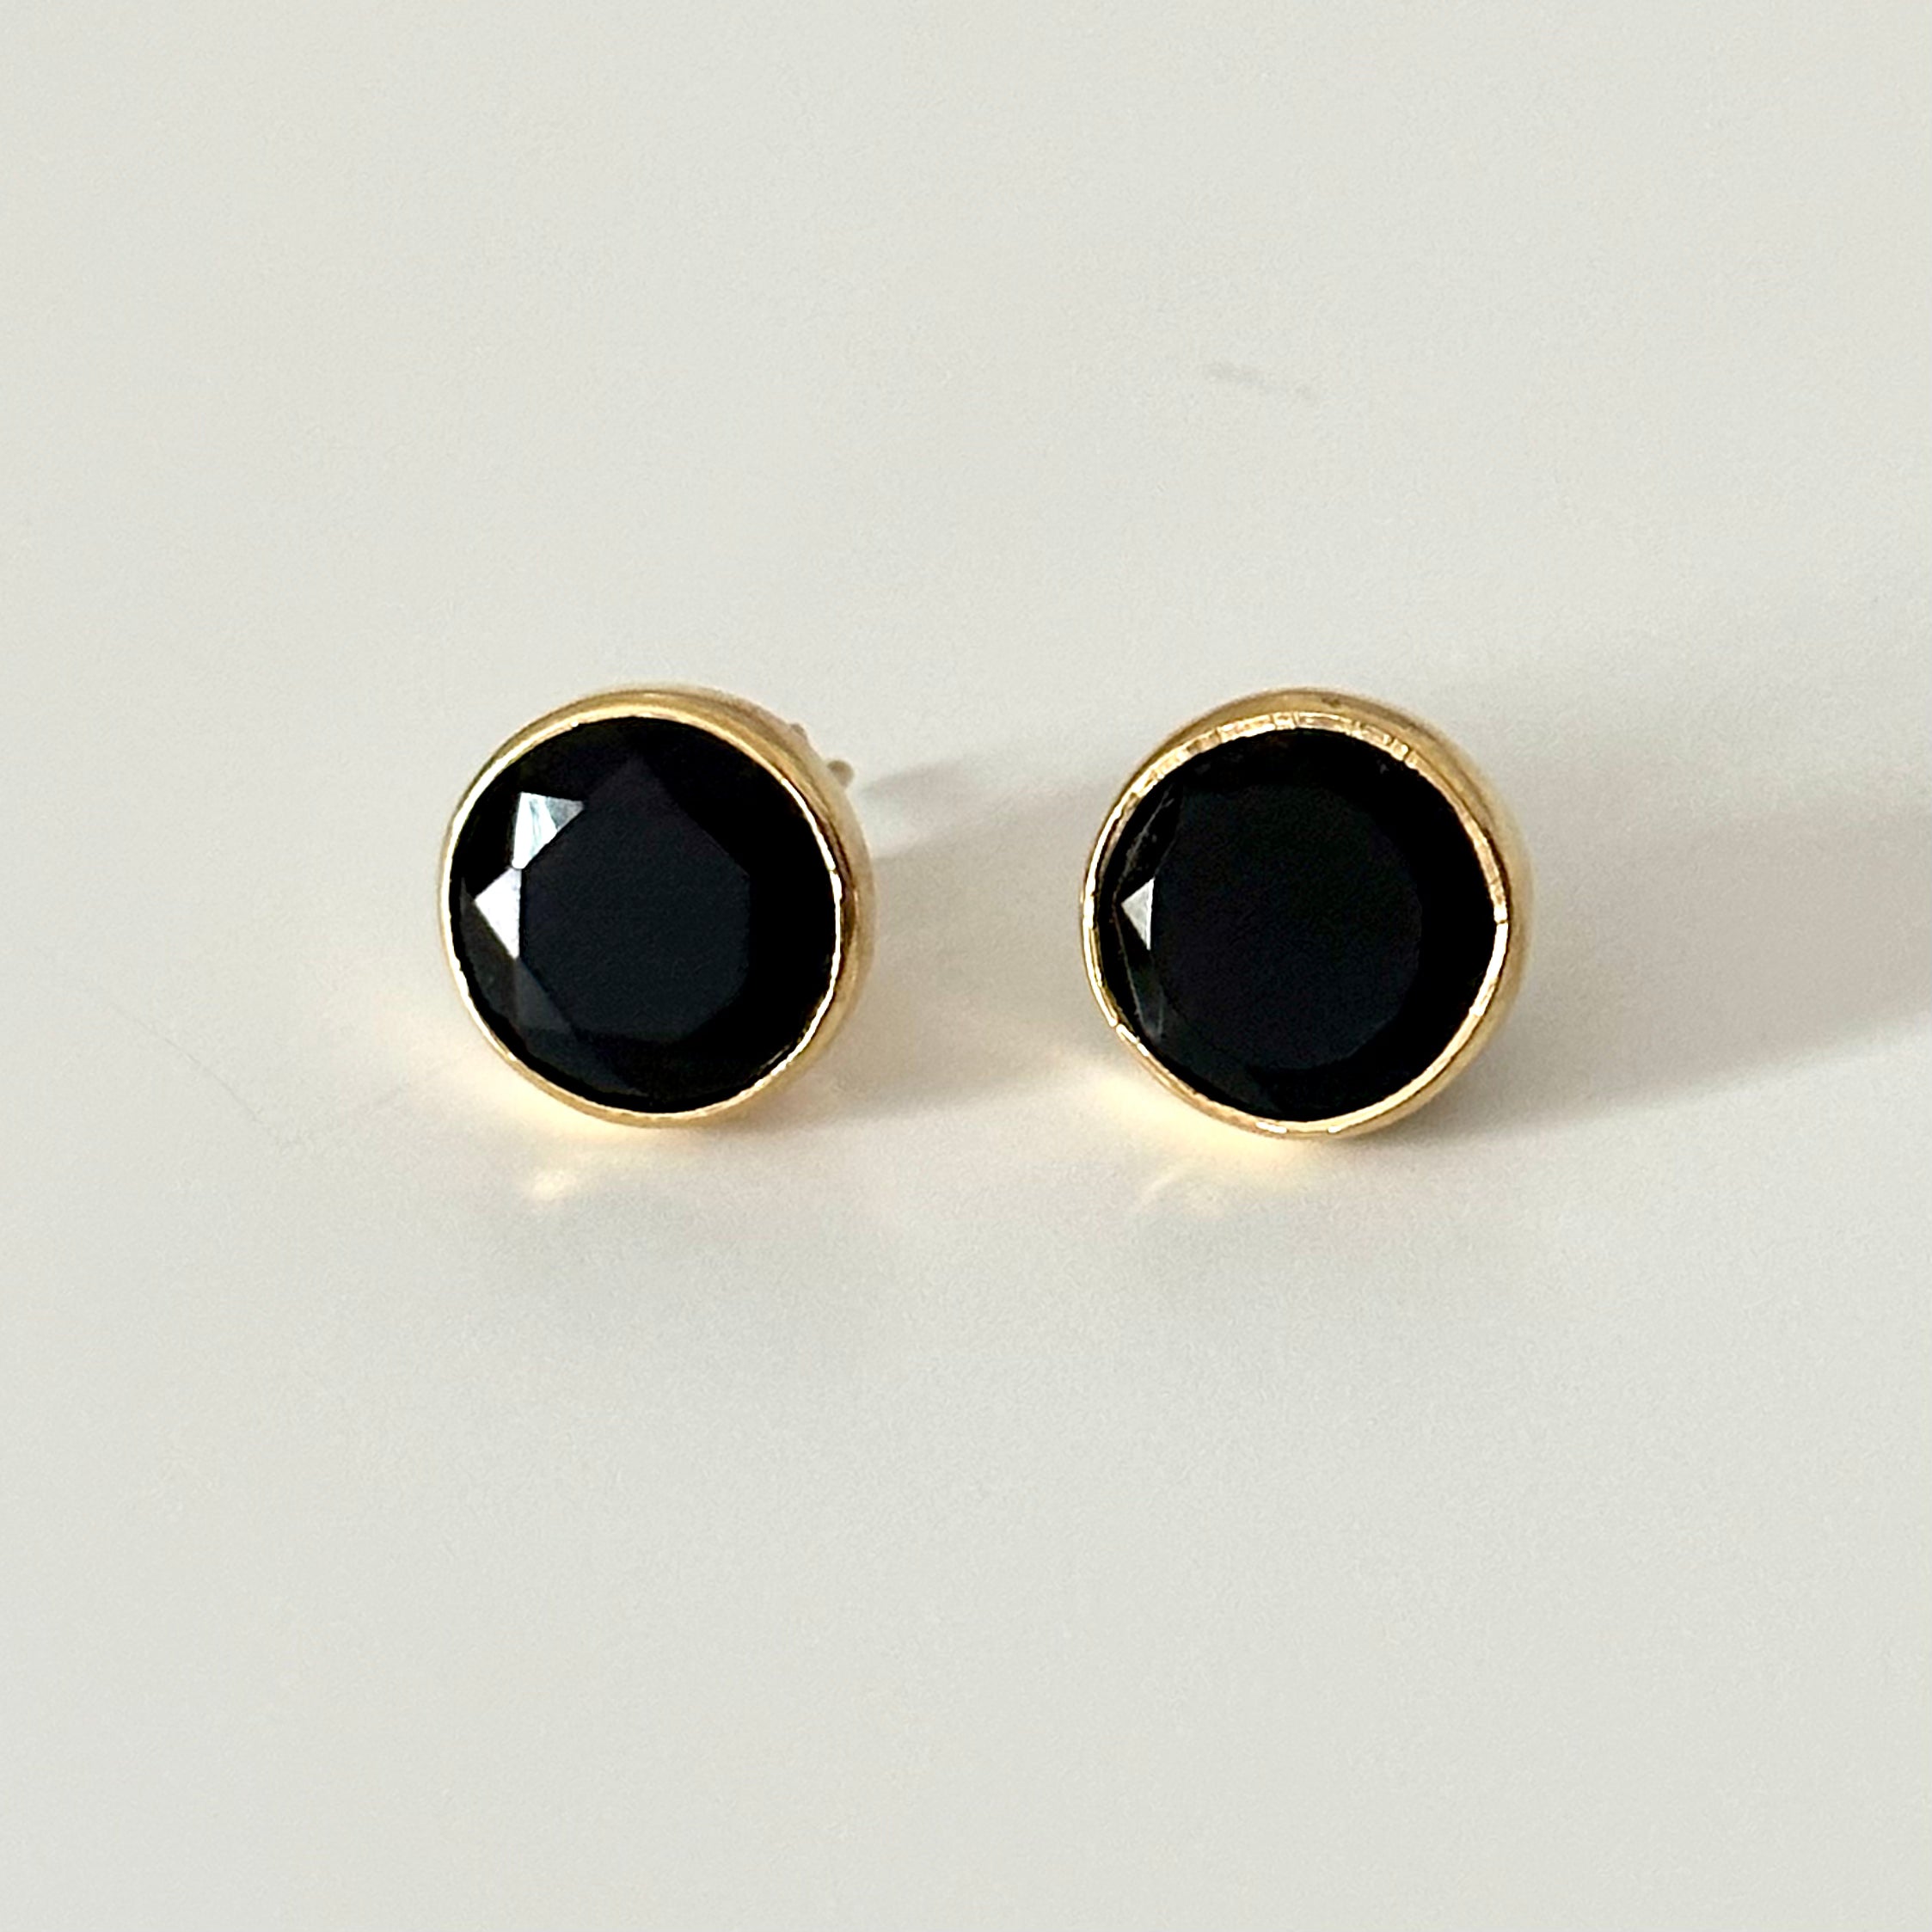 Black Onyx Studs in Gold Plated Sterling Silver with a Round Faceted Gemstone - Milina London